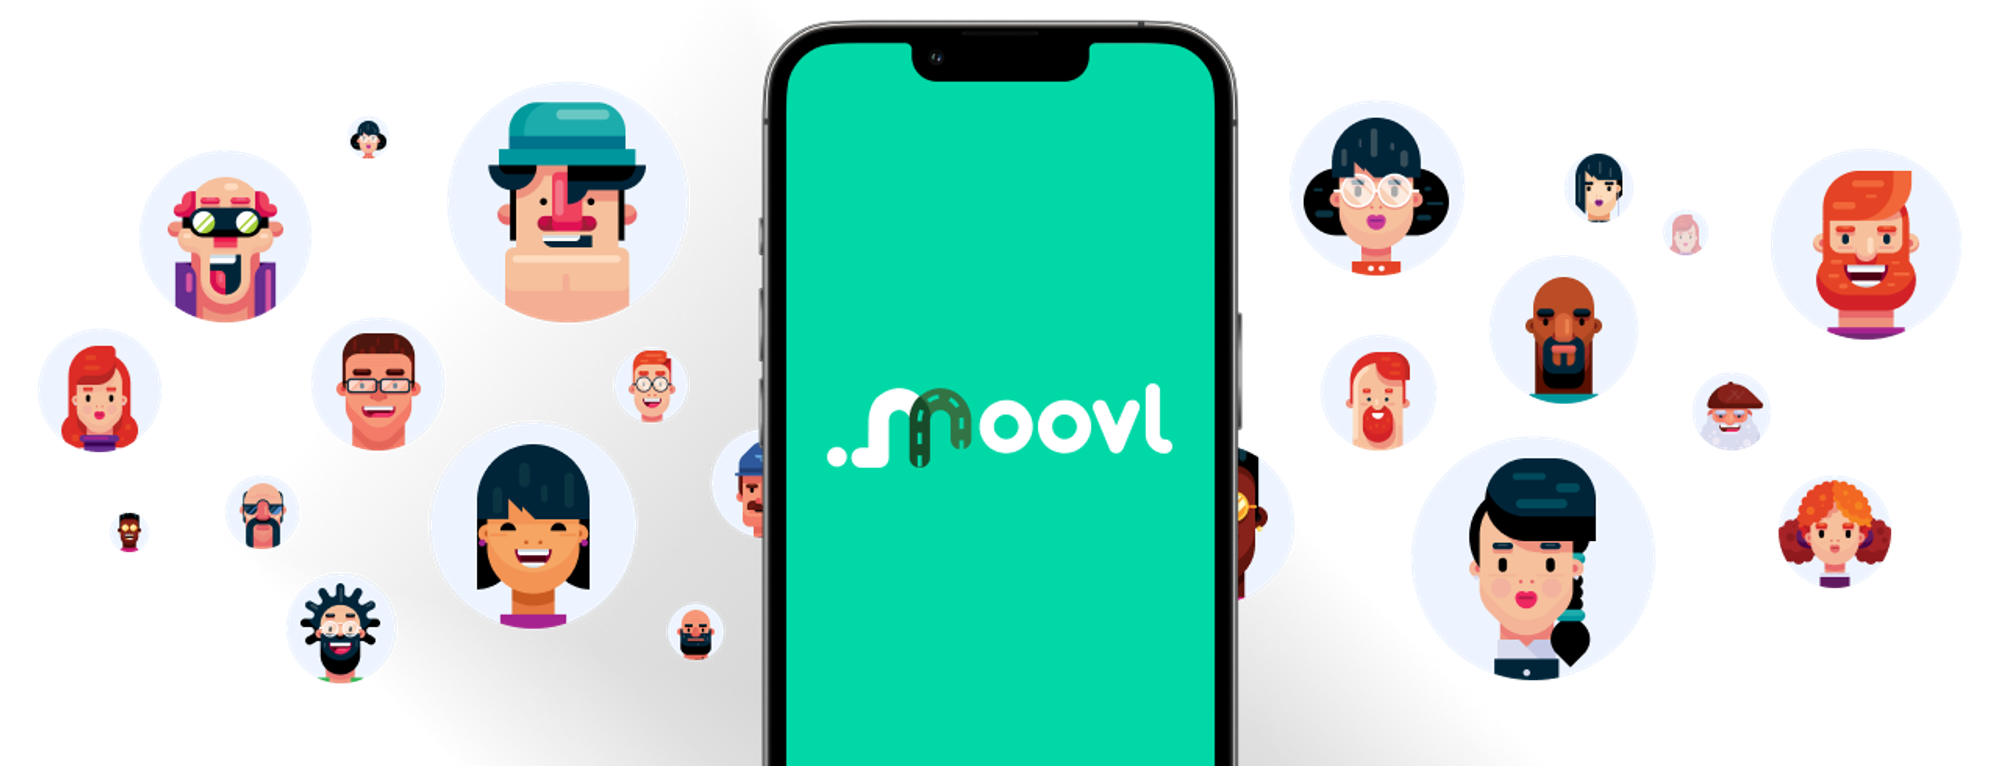 Access Moovl rides via the Android or IOS application